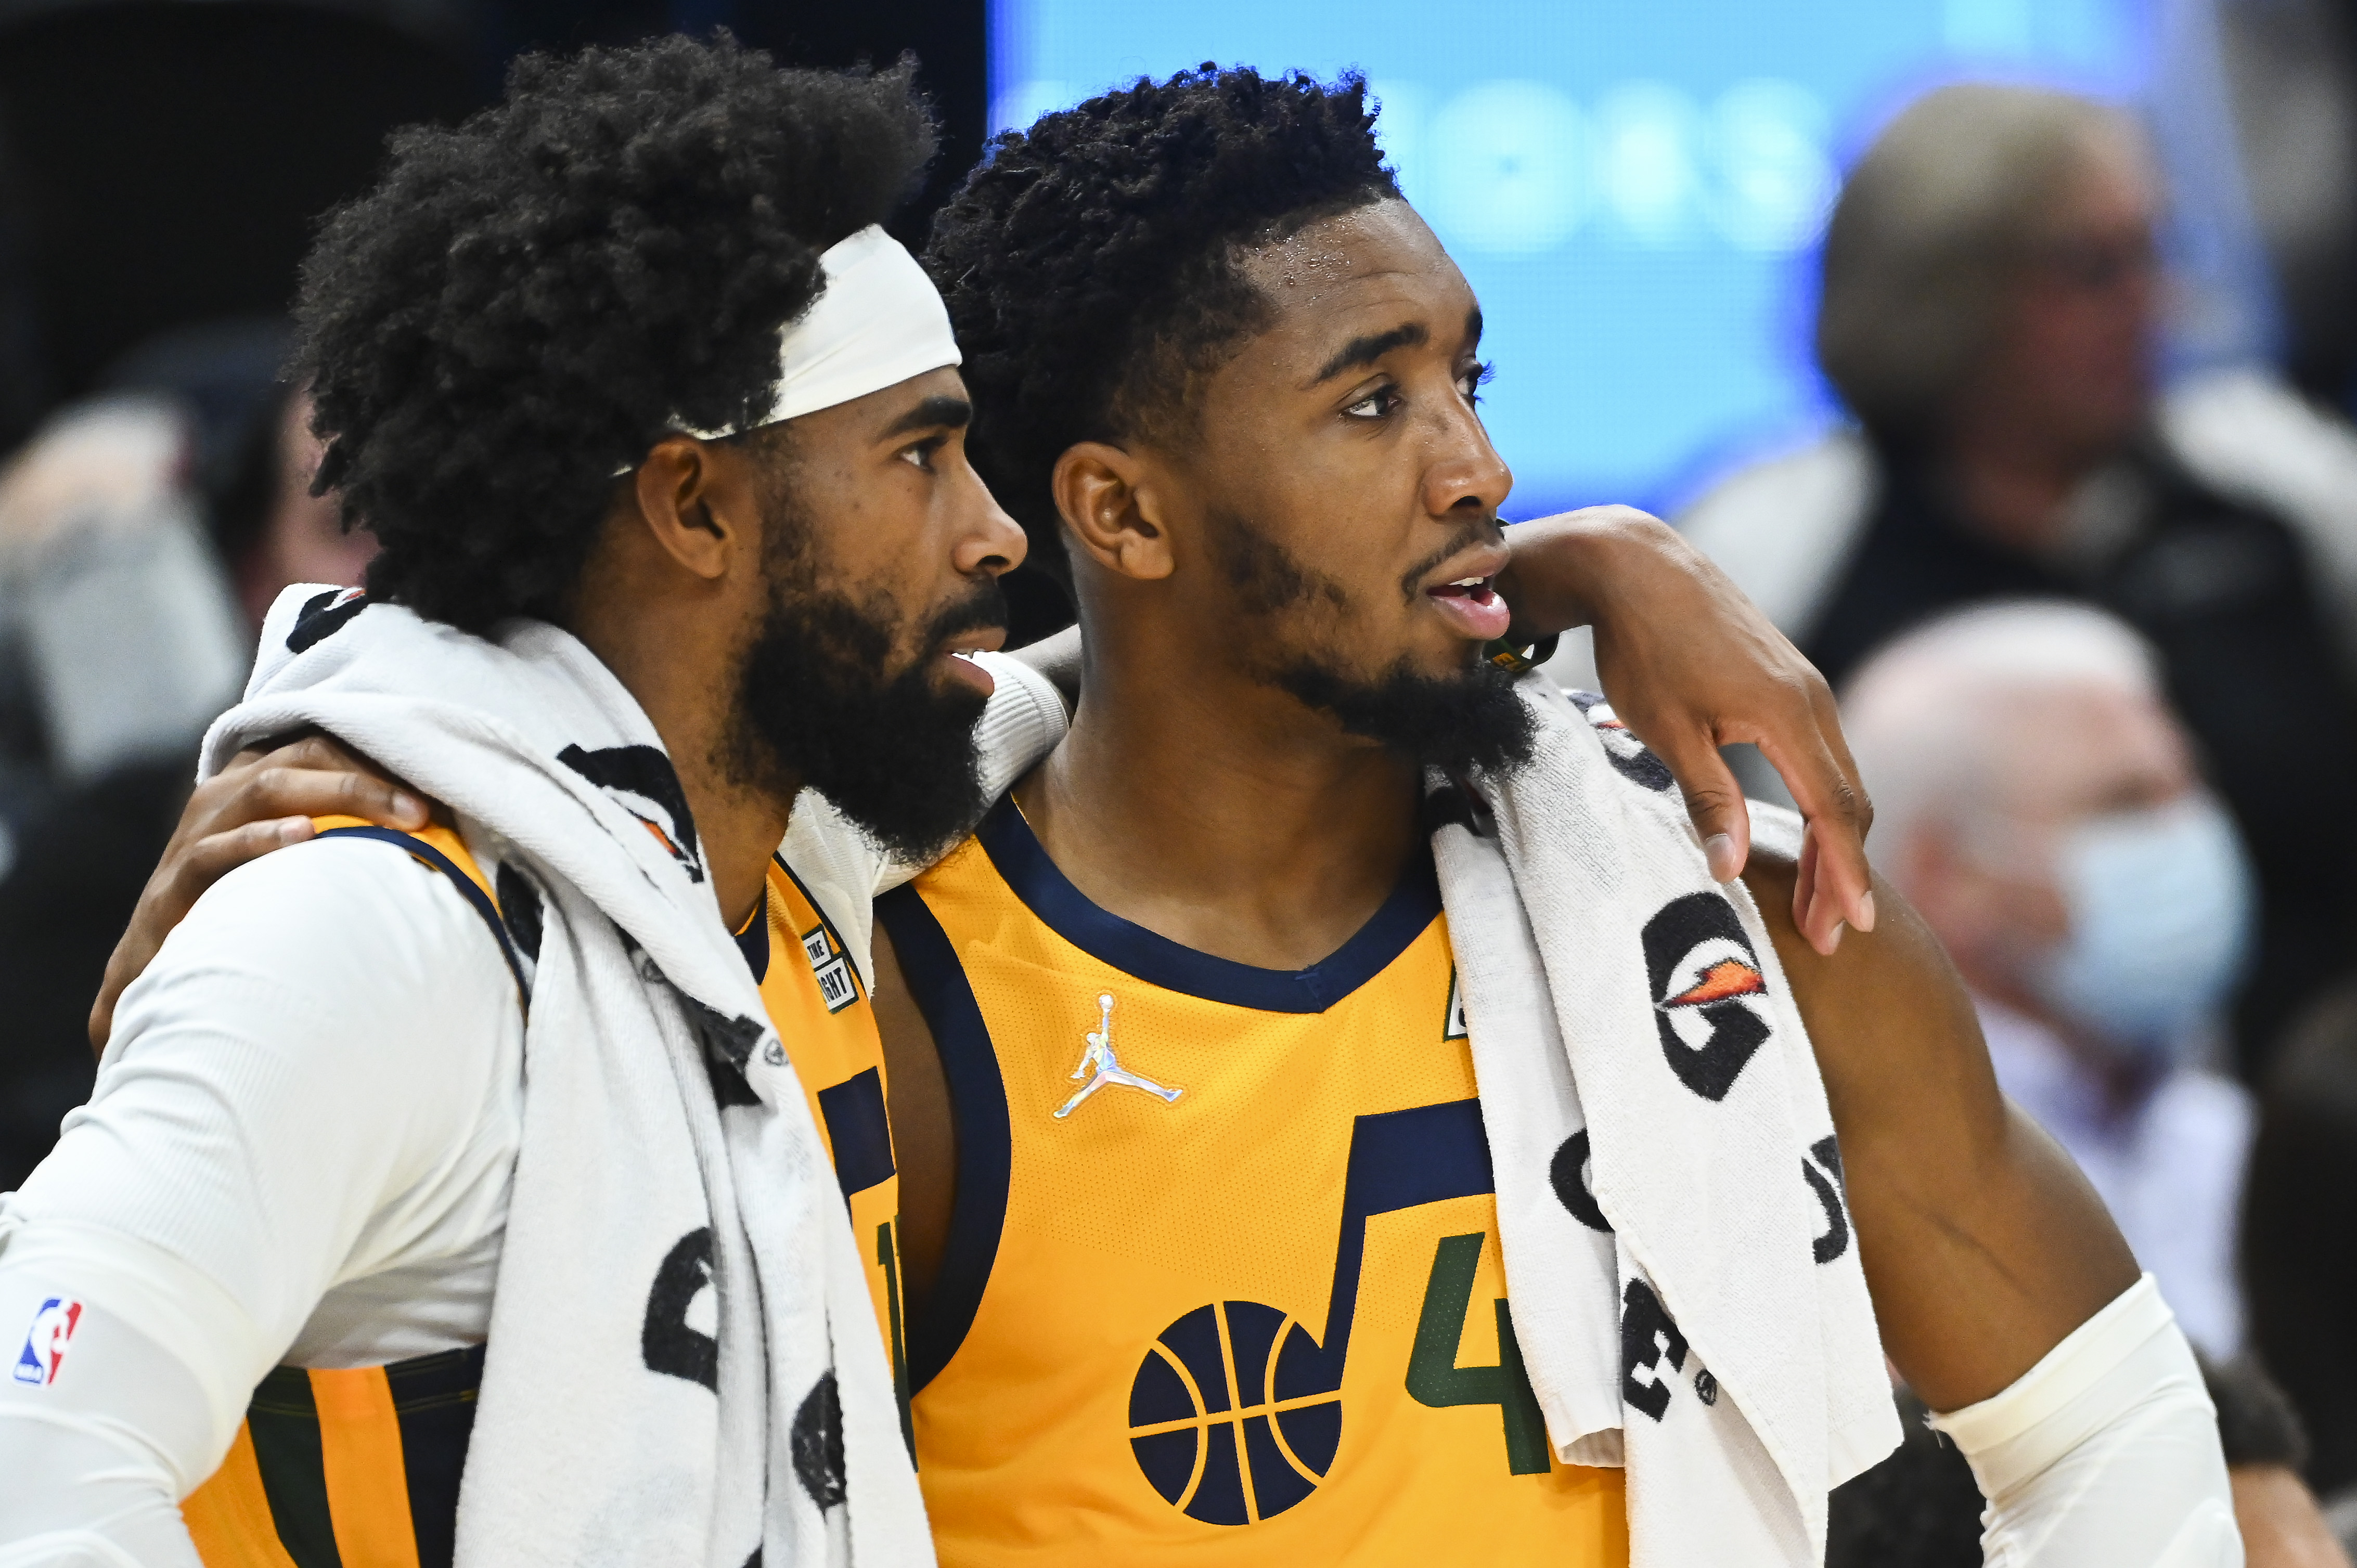 Utah Jazz guards Mike Conley and Donovan Mitchell look on during a win over the Portland Trail Blazers